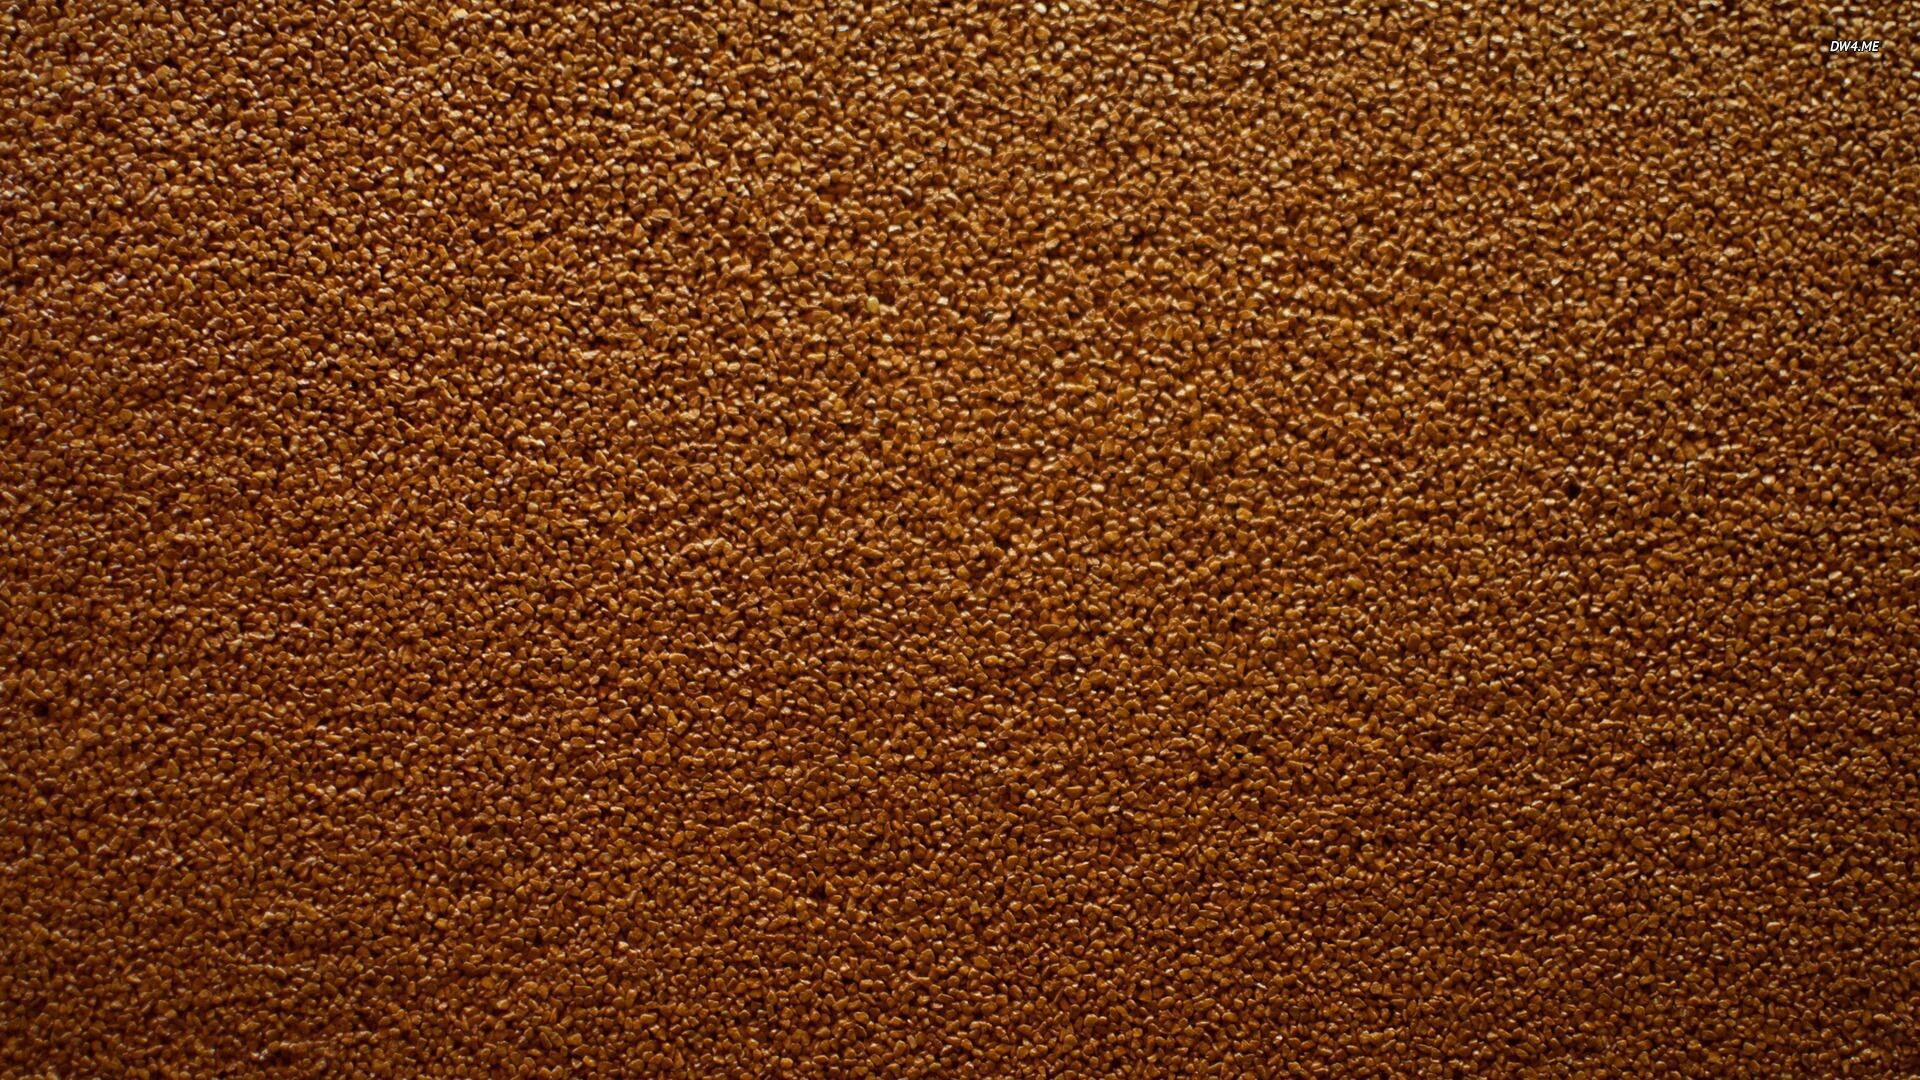 40+ Brown Wallpapers: HD, 4K, 5K for PC and Mobile | Download free images  for iPhone, Android